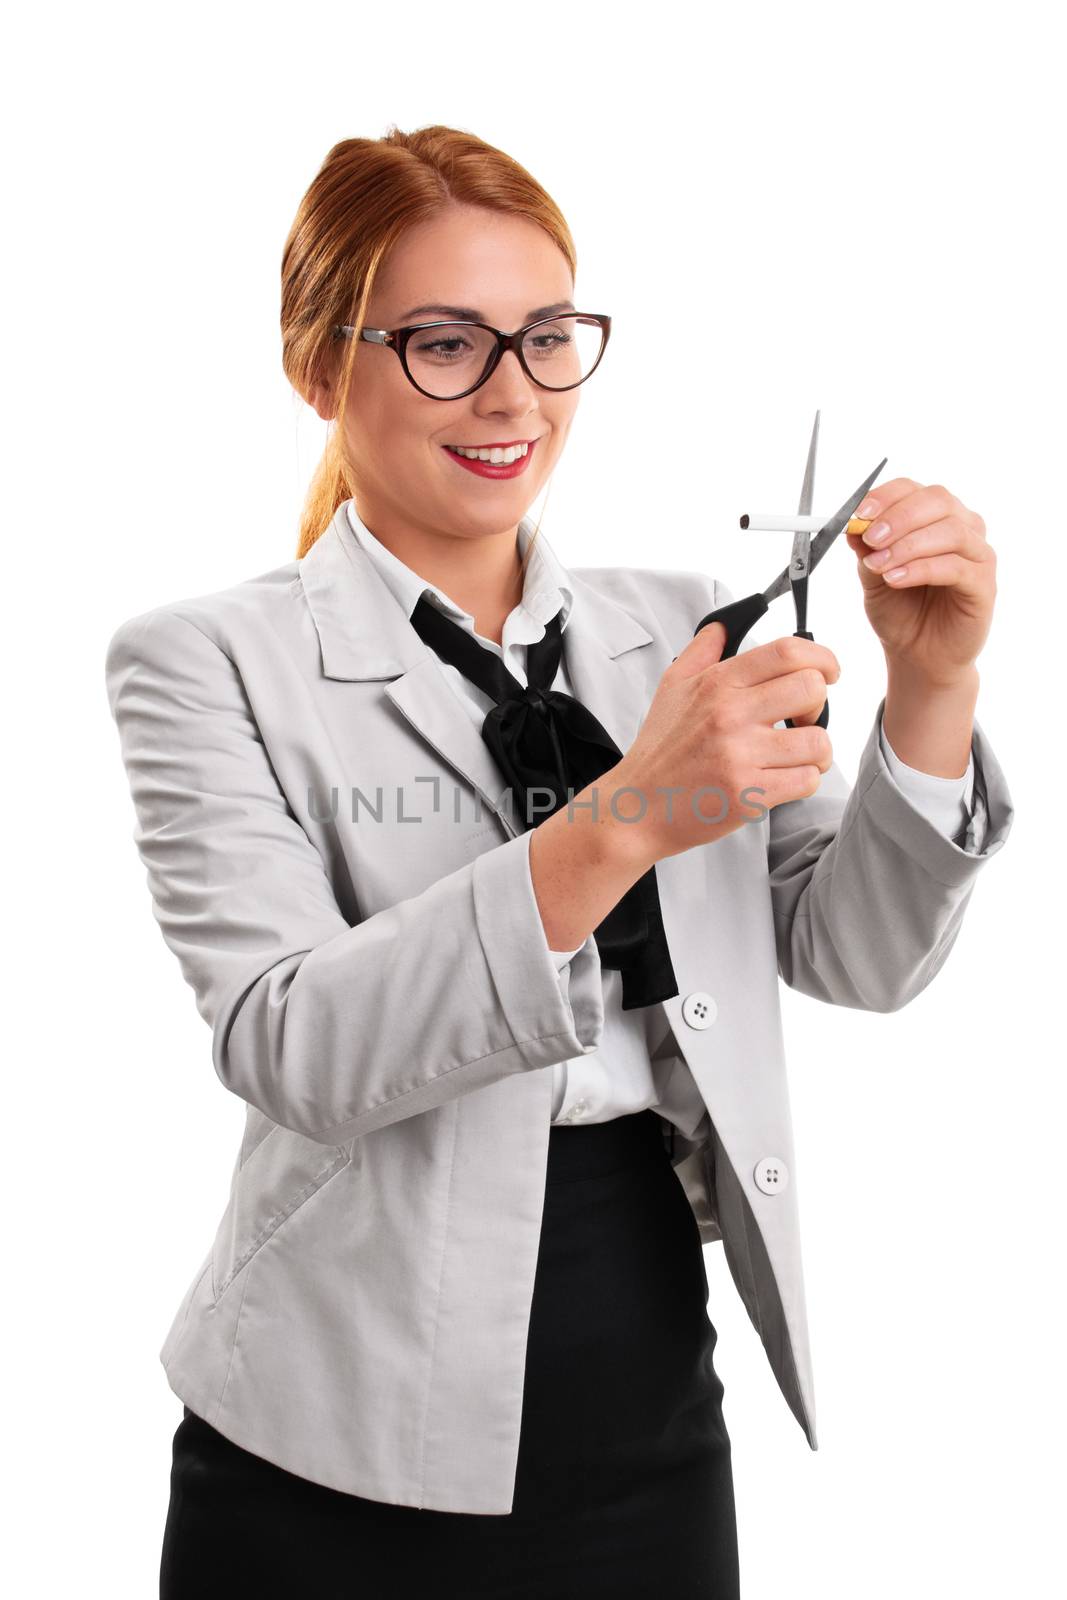 Young modern business woman cutting a cigarette with scissors, isolated on a white background.